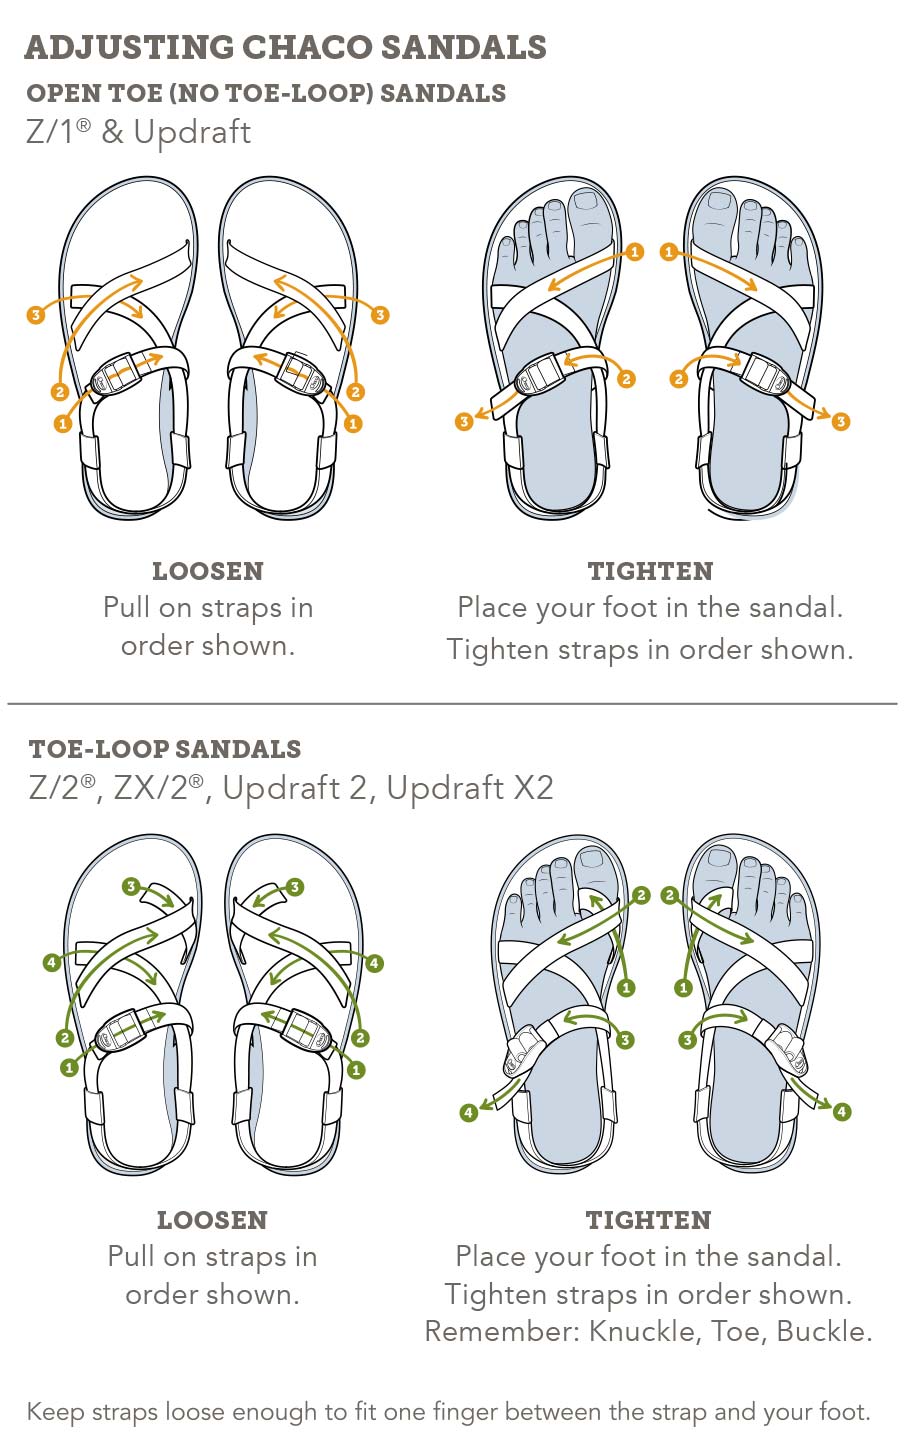 Which Chaco Sandals are Best? - Englin 